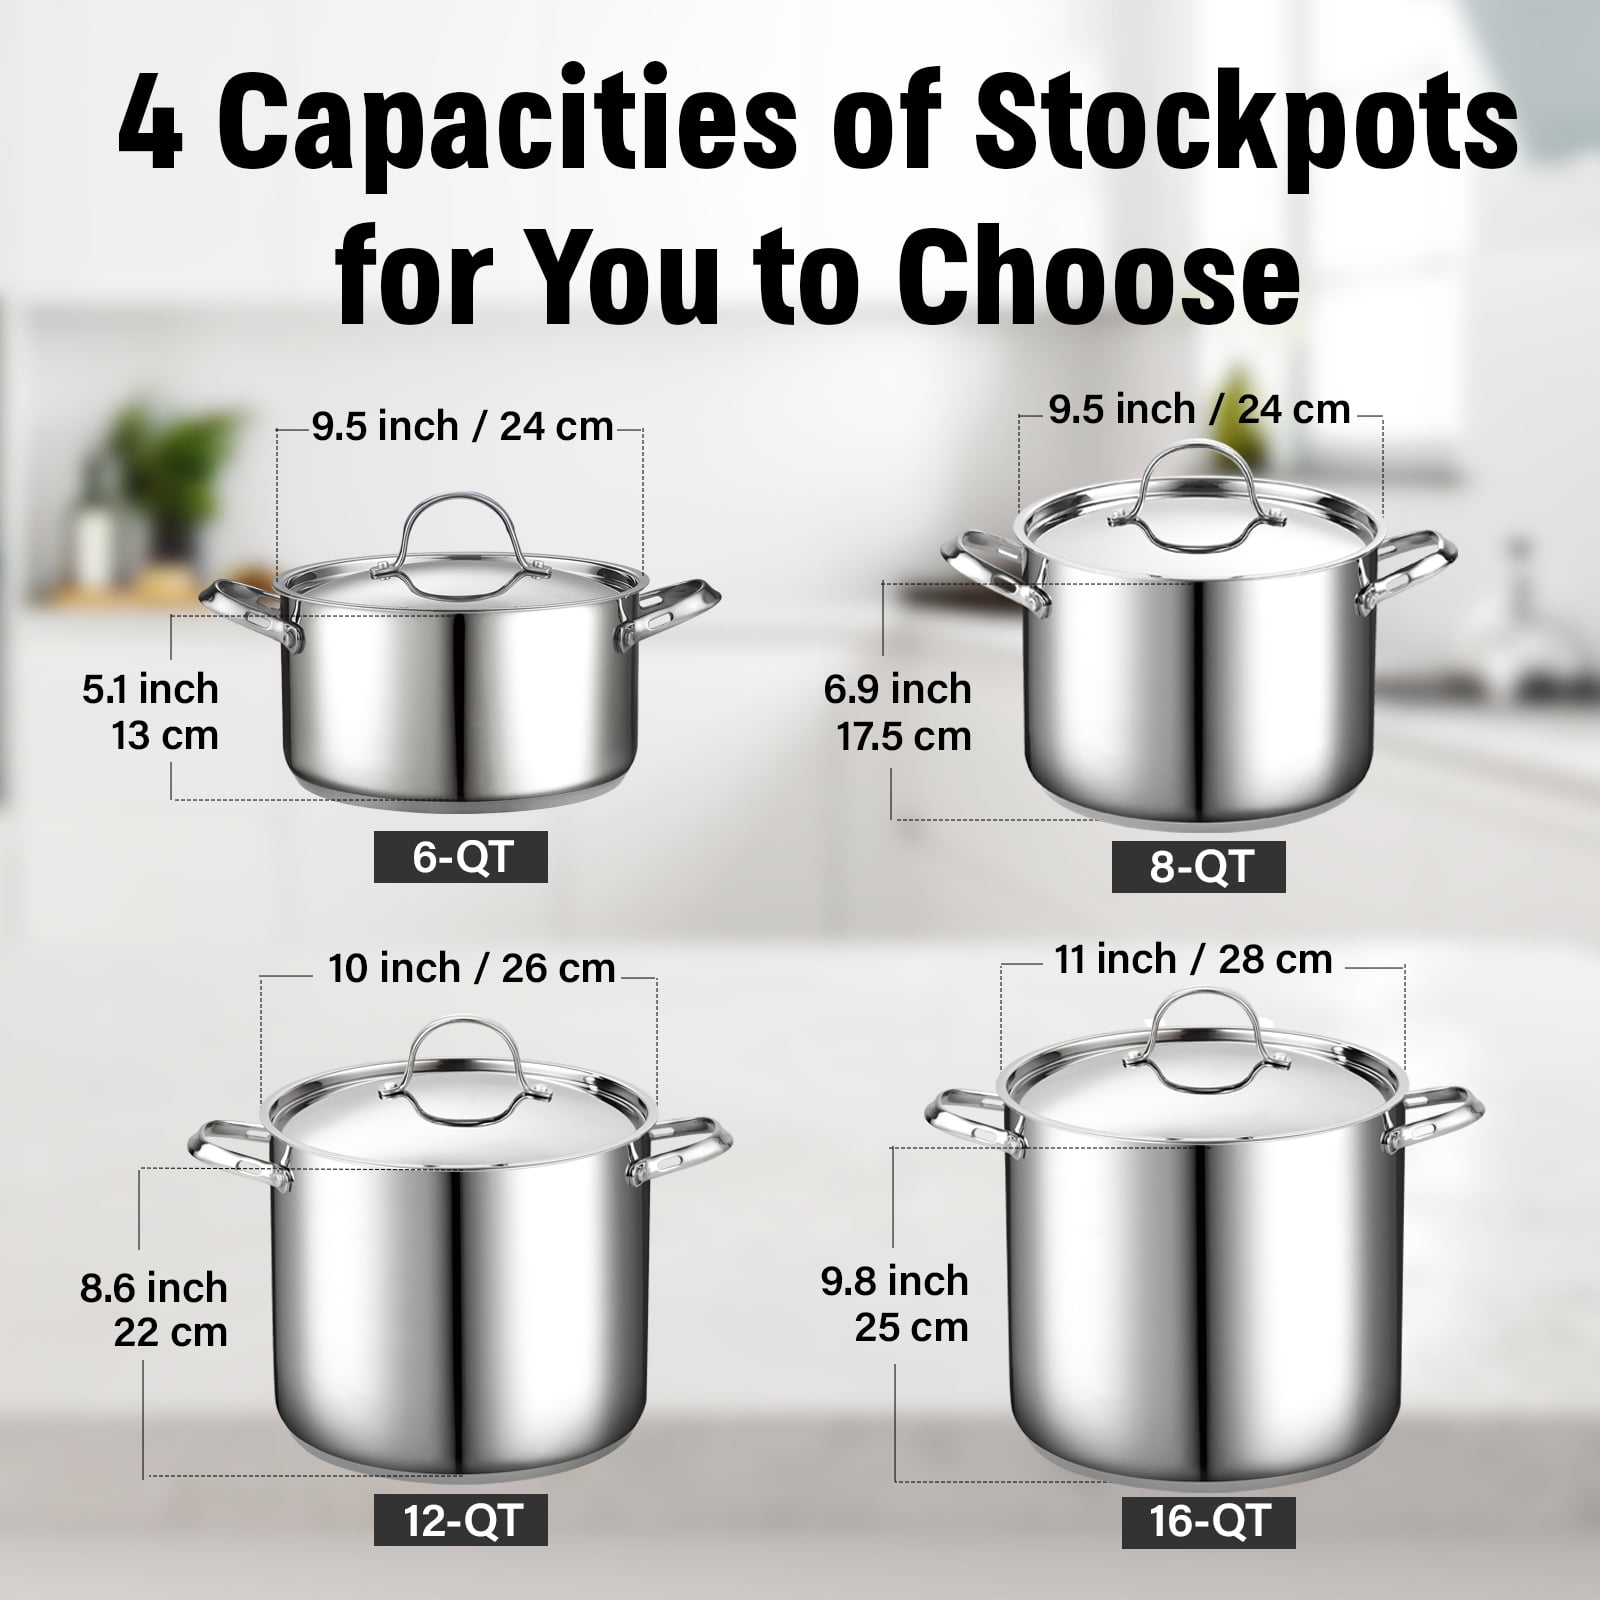 What Size Stock Pot Should You Buy? (Quick Guide) - Prudent Reviews